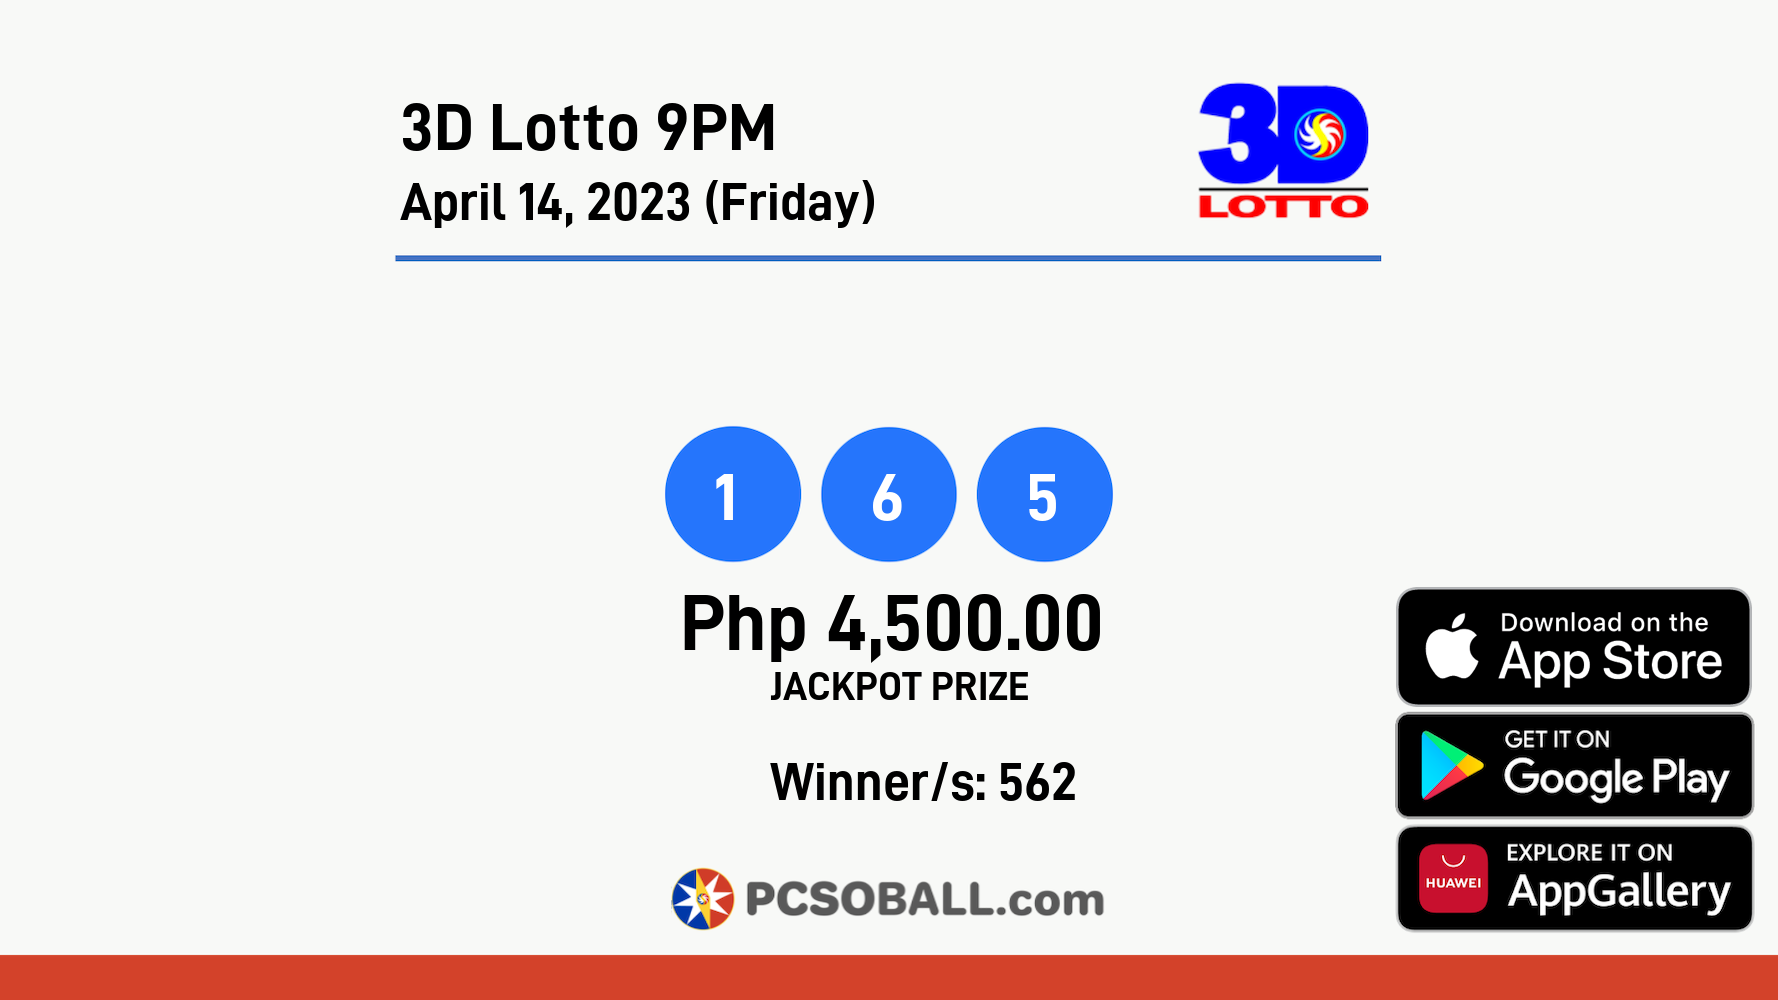 3D Lotto 9PM April 14, 2023 (Friday) Result